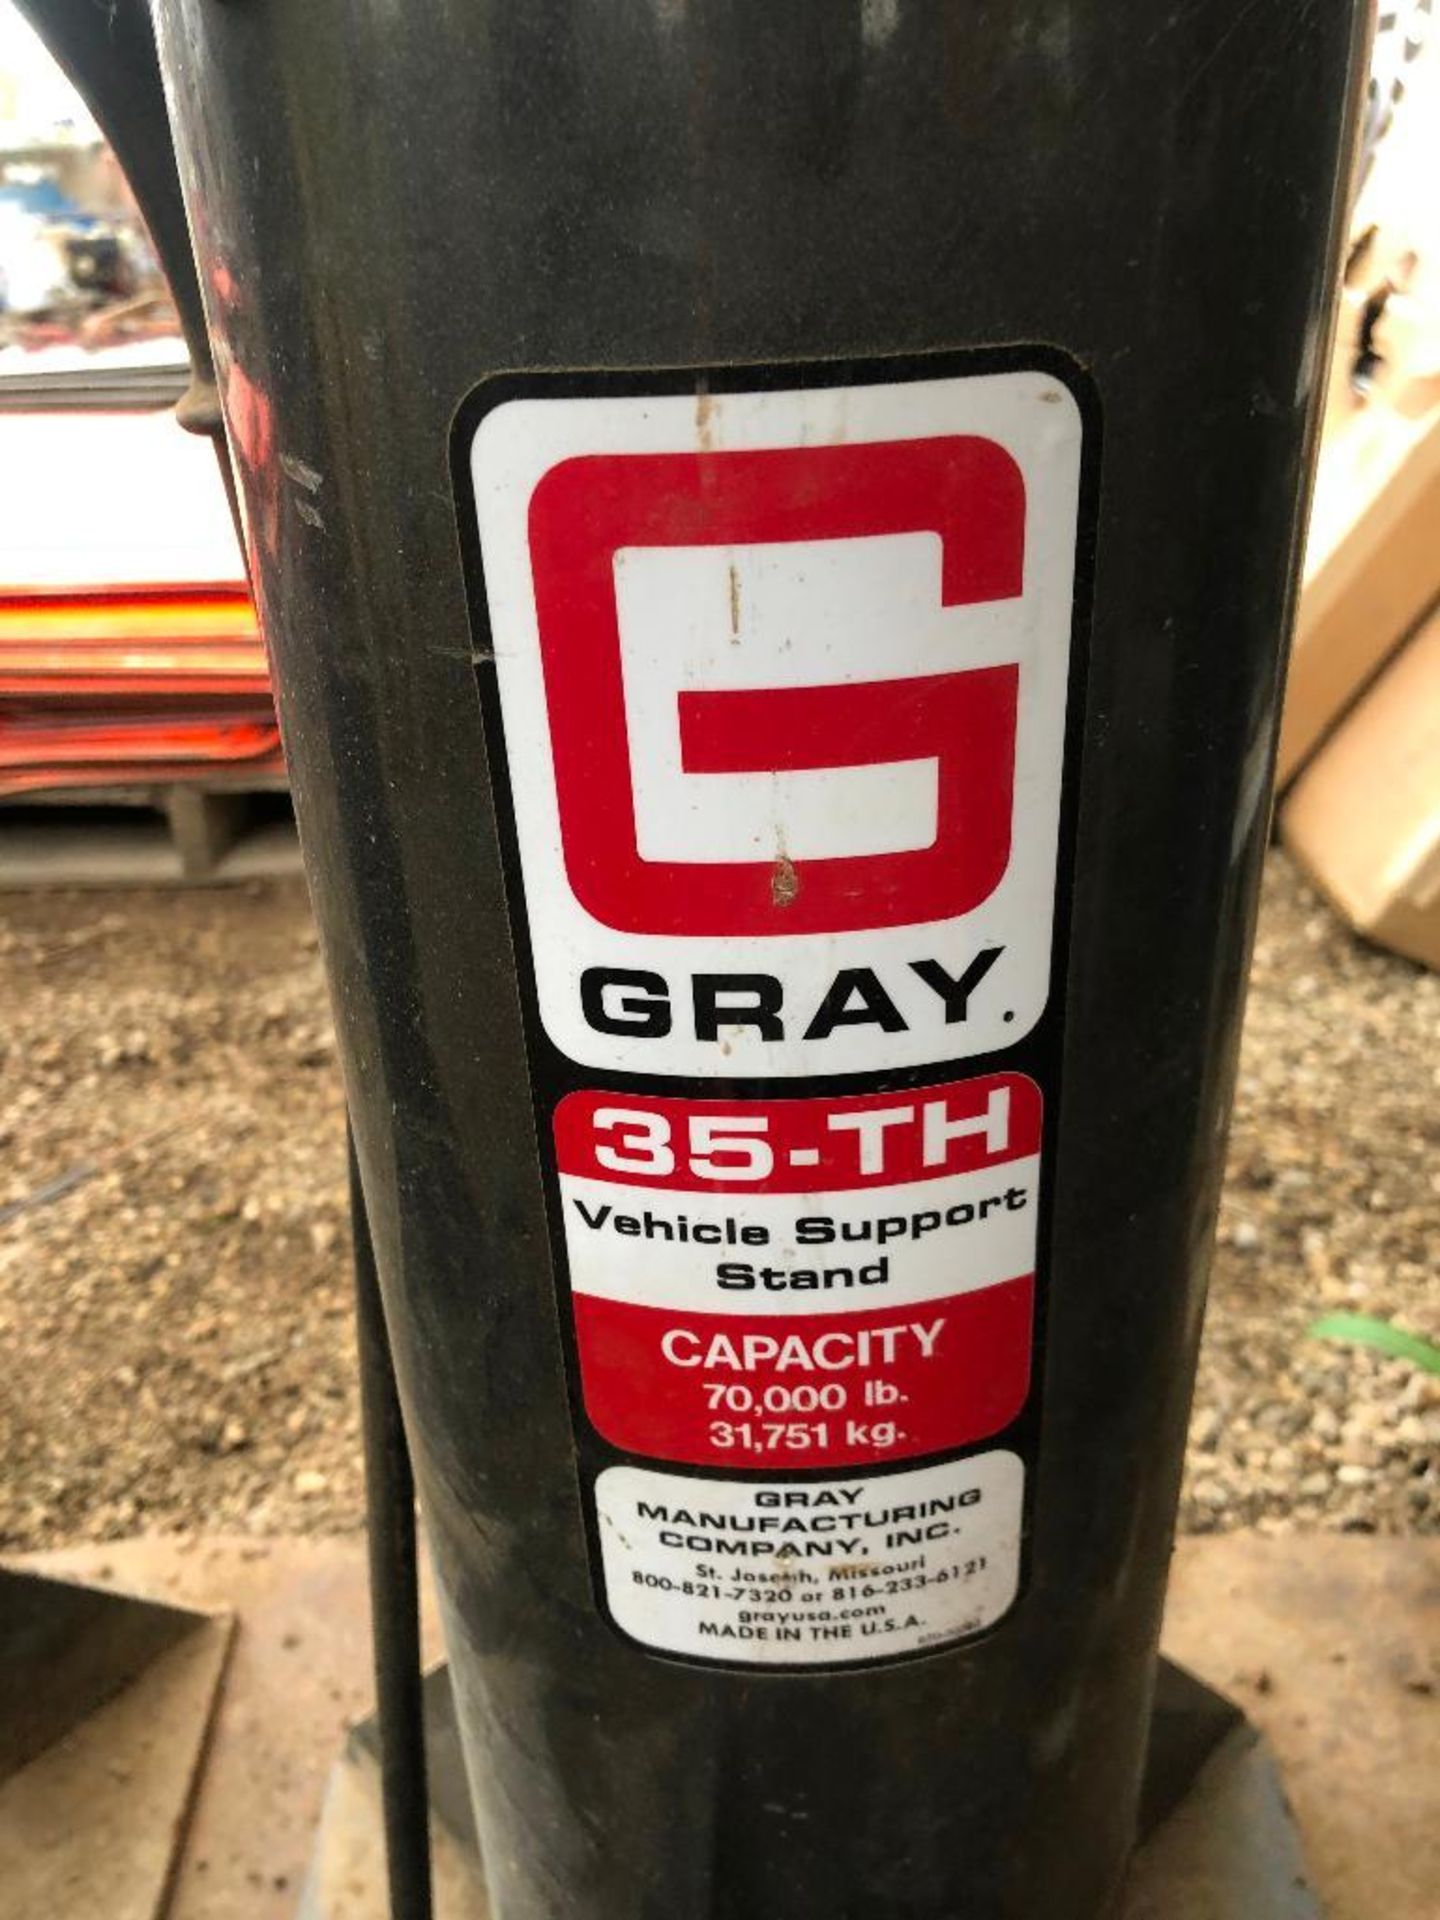 Lot of (2) Gray 35-TH Vehicle Support Stands, 70,000lb. Capacity - Image 3 of 3